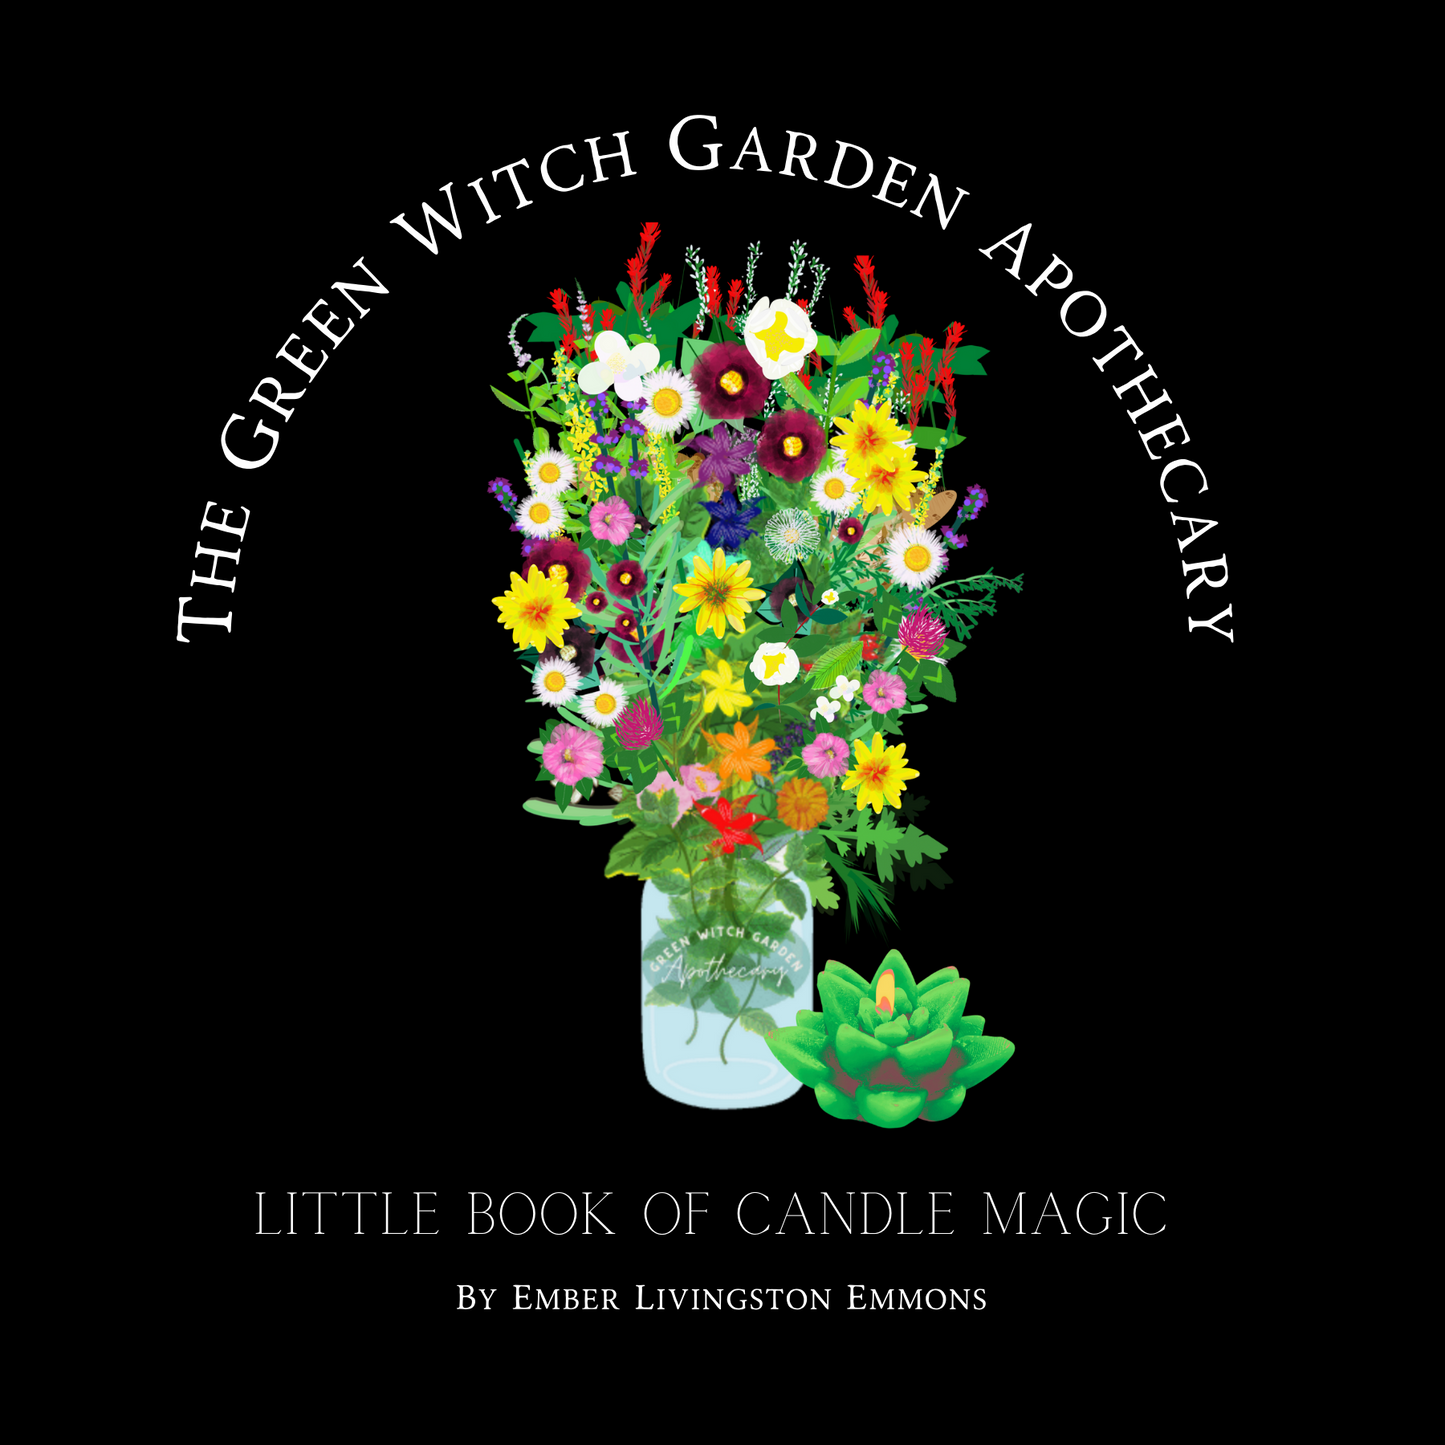 The Green Witch Garden Apothecary Little Book of Candle Magic